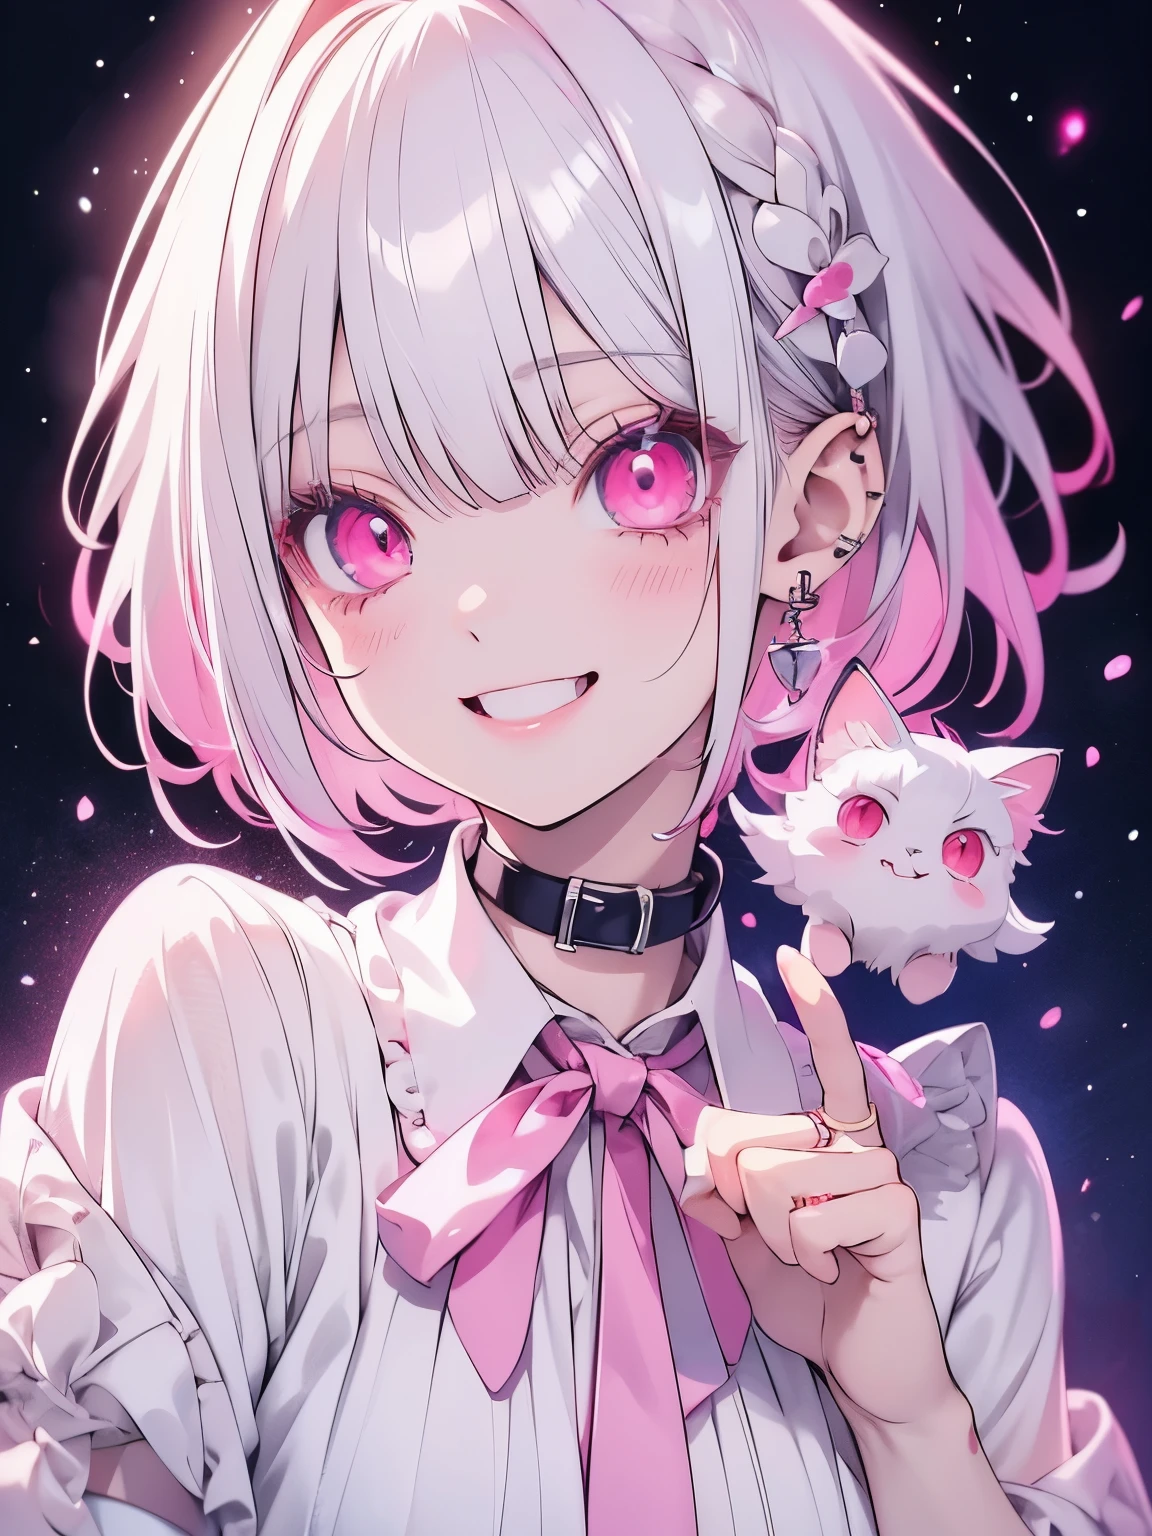 White hair. Short hair. Inner pink hair. Anime girl. Cute face. Pink eyes. Glowing eyes. Nekomimi. Smiling. White clothes. Pink tie. Small breast.